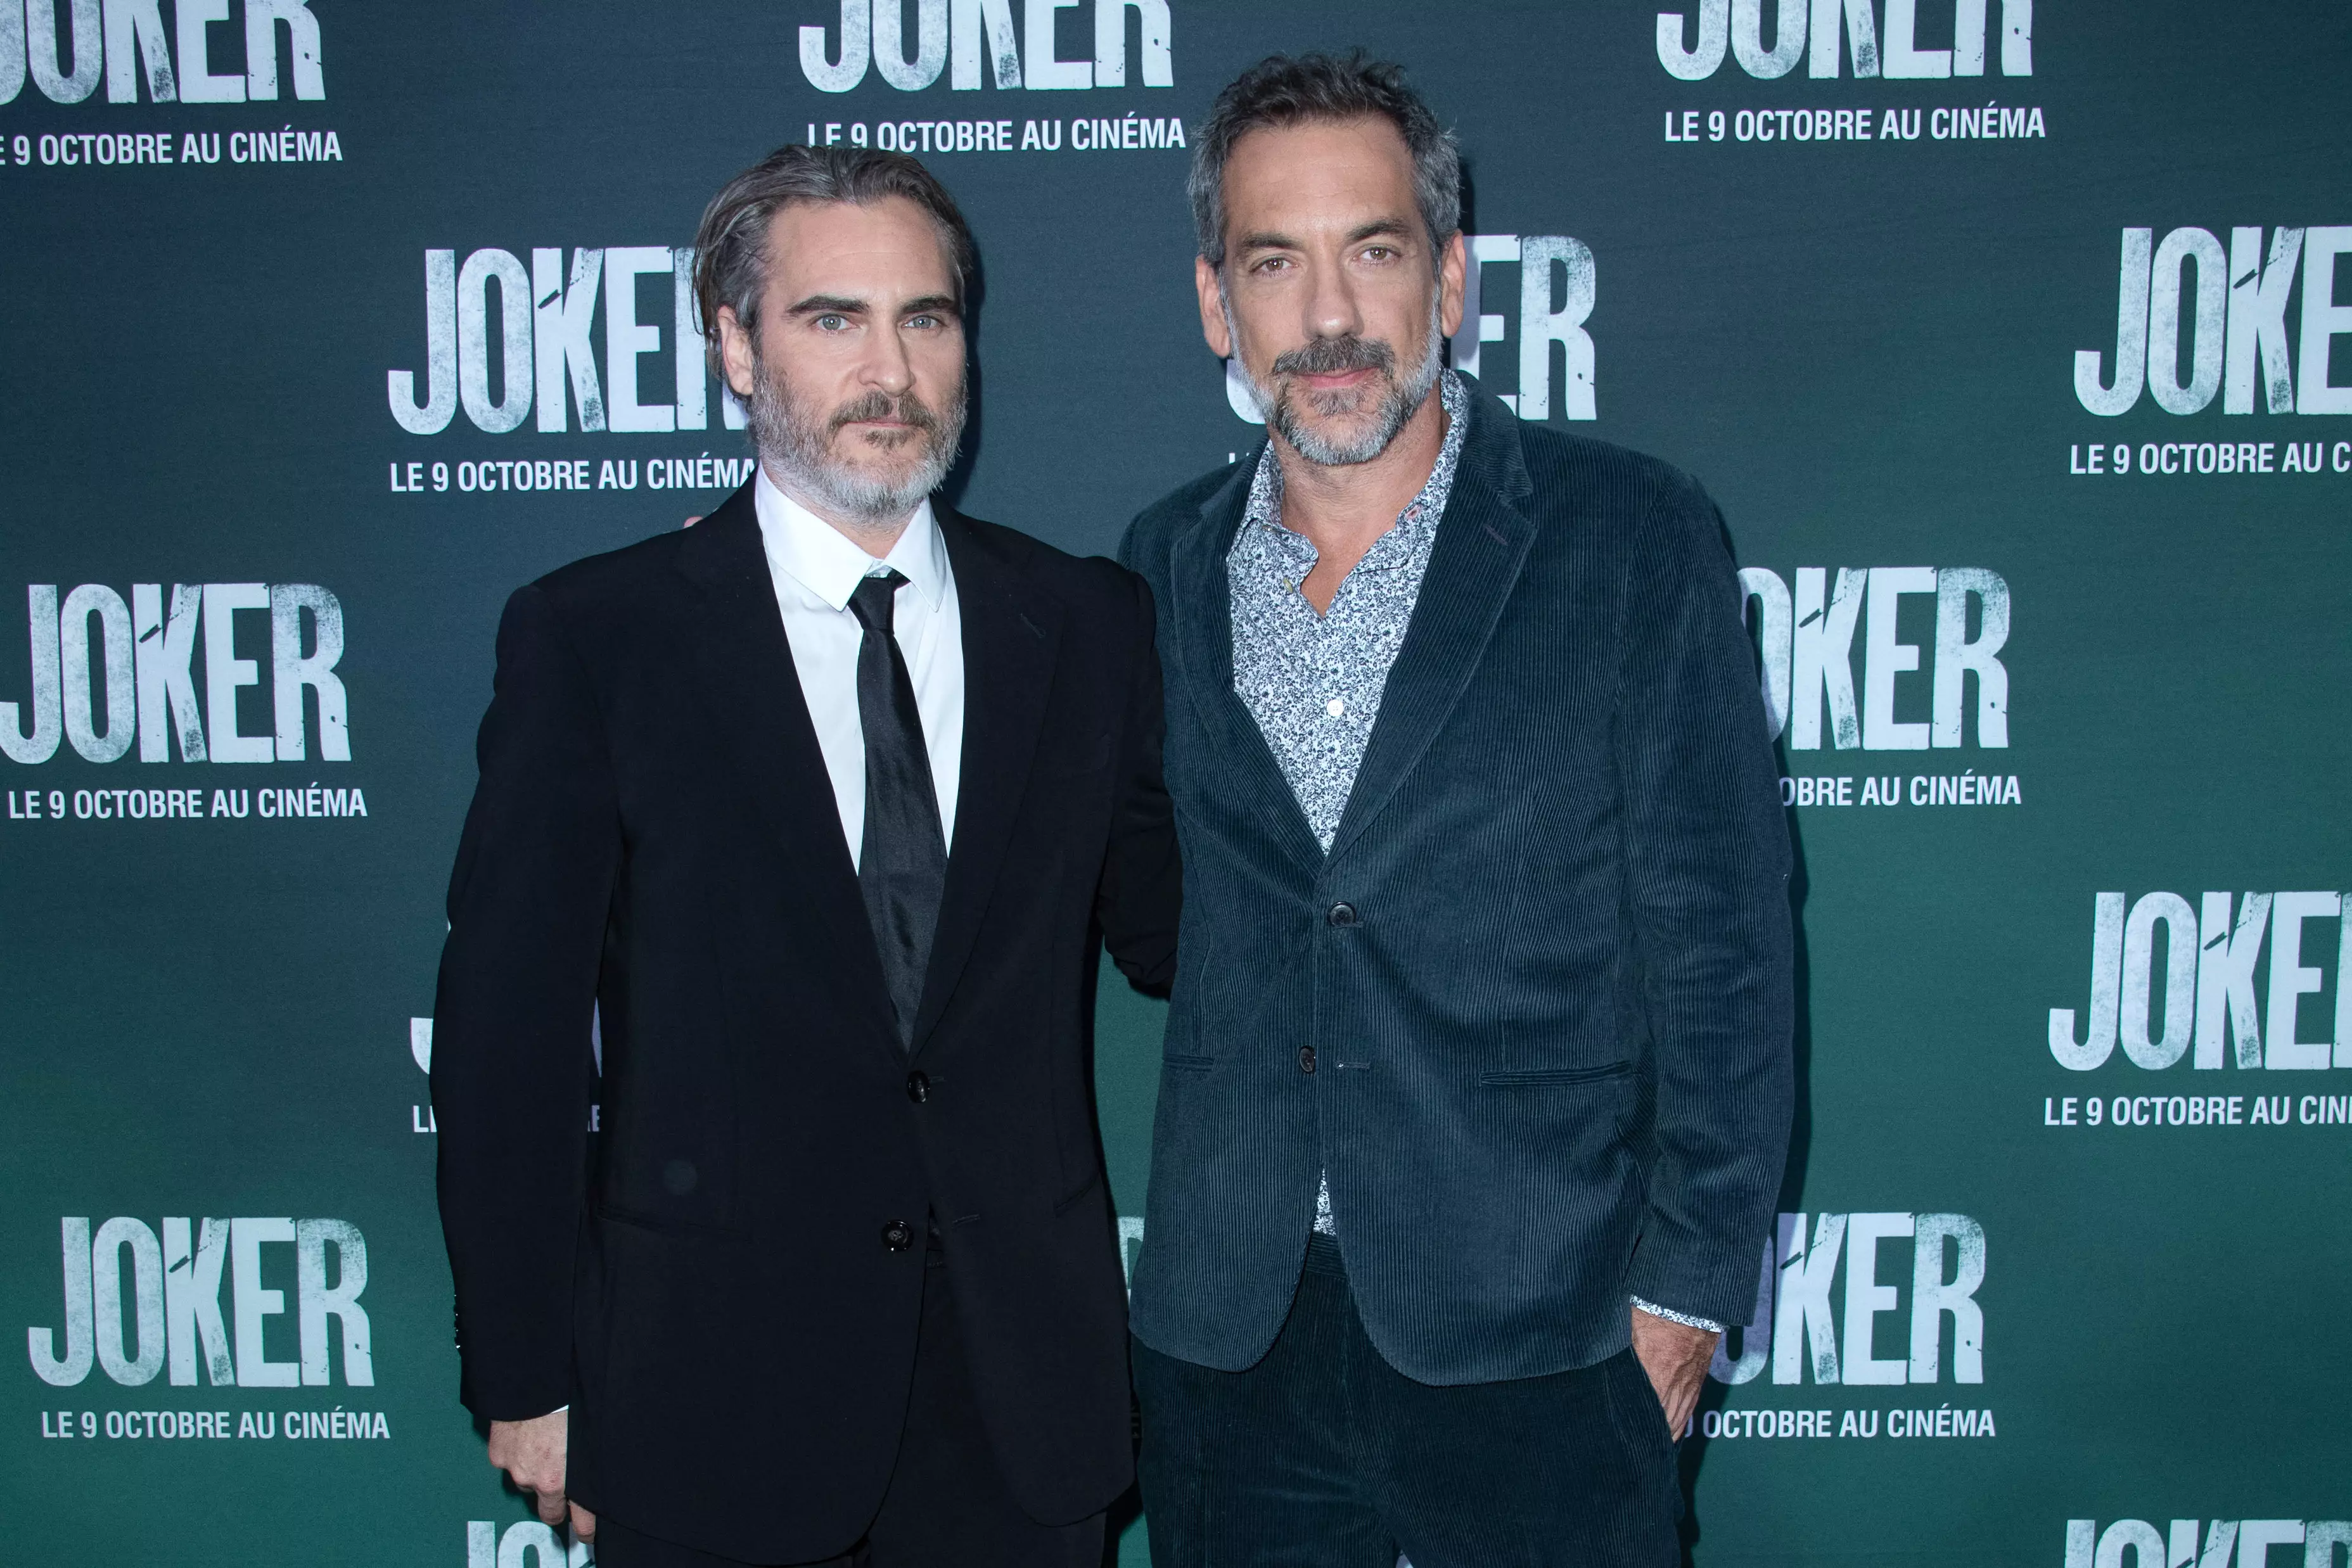 Joaquin Phoenix has been heaped with praise for his portrayal of Joker.